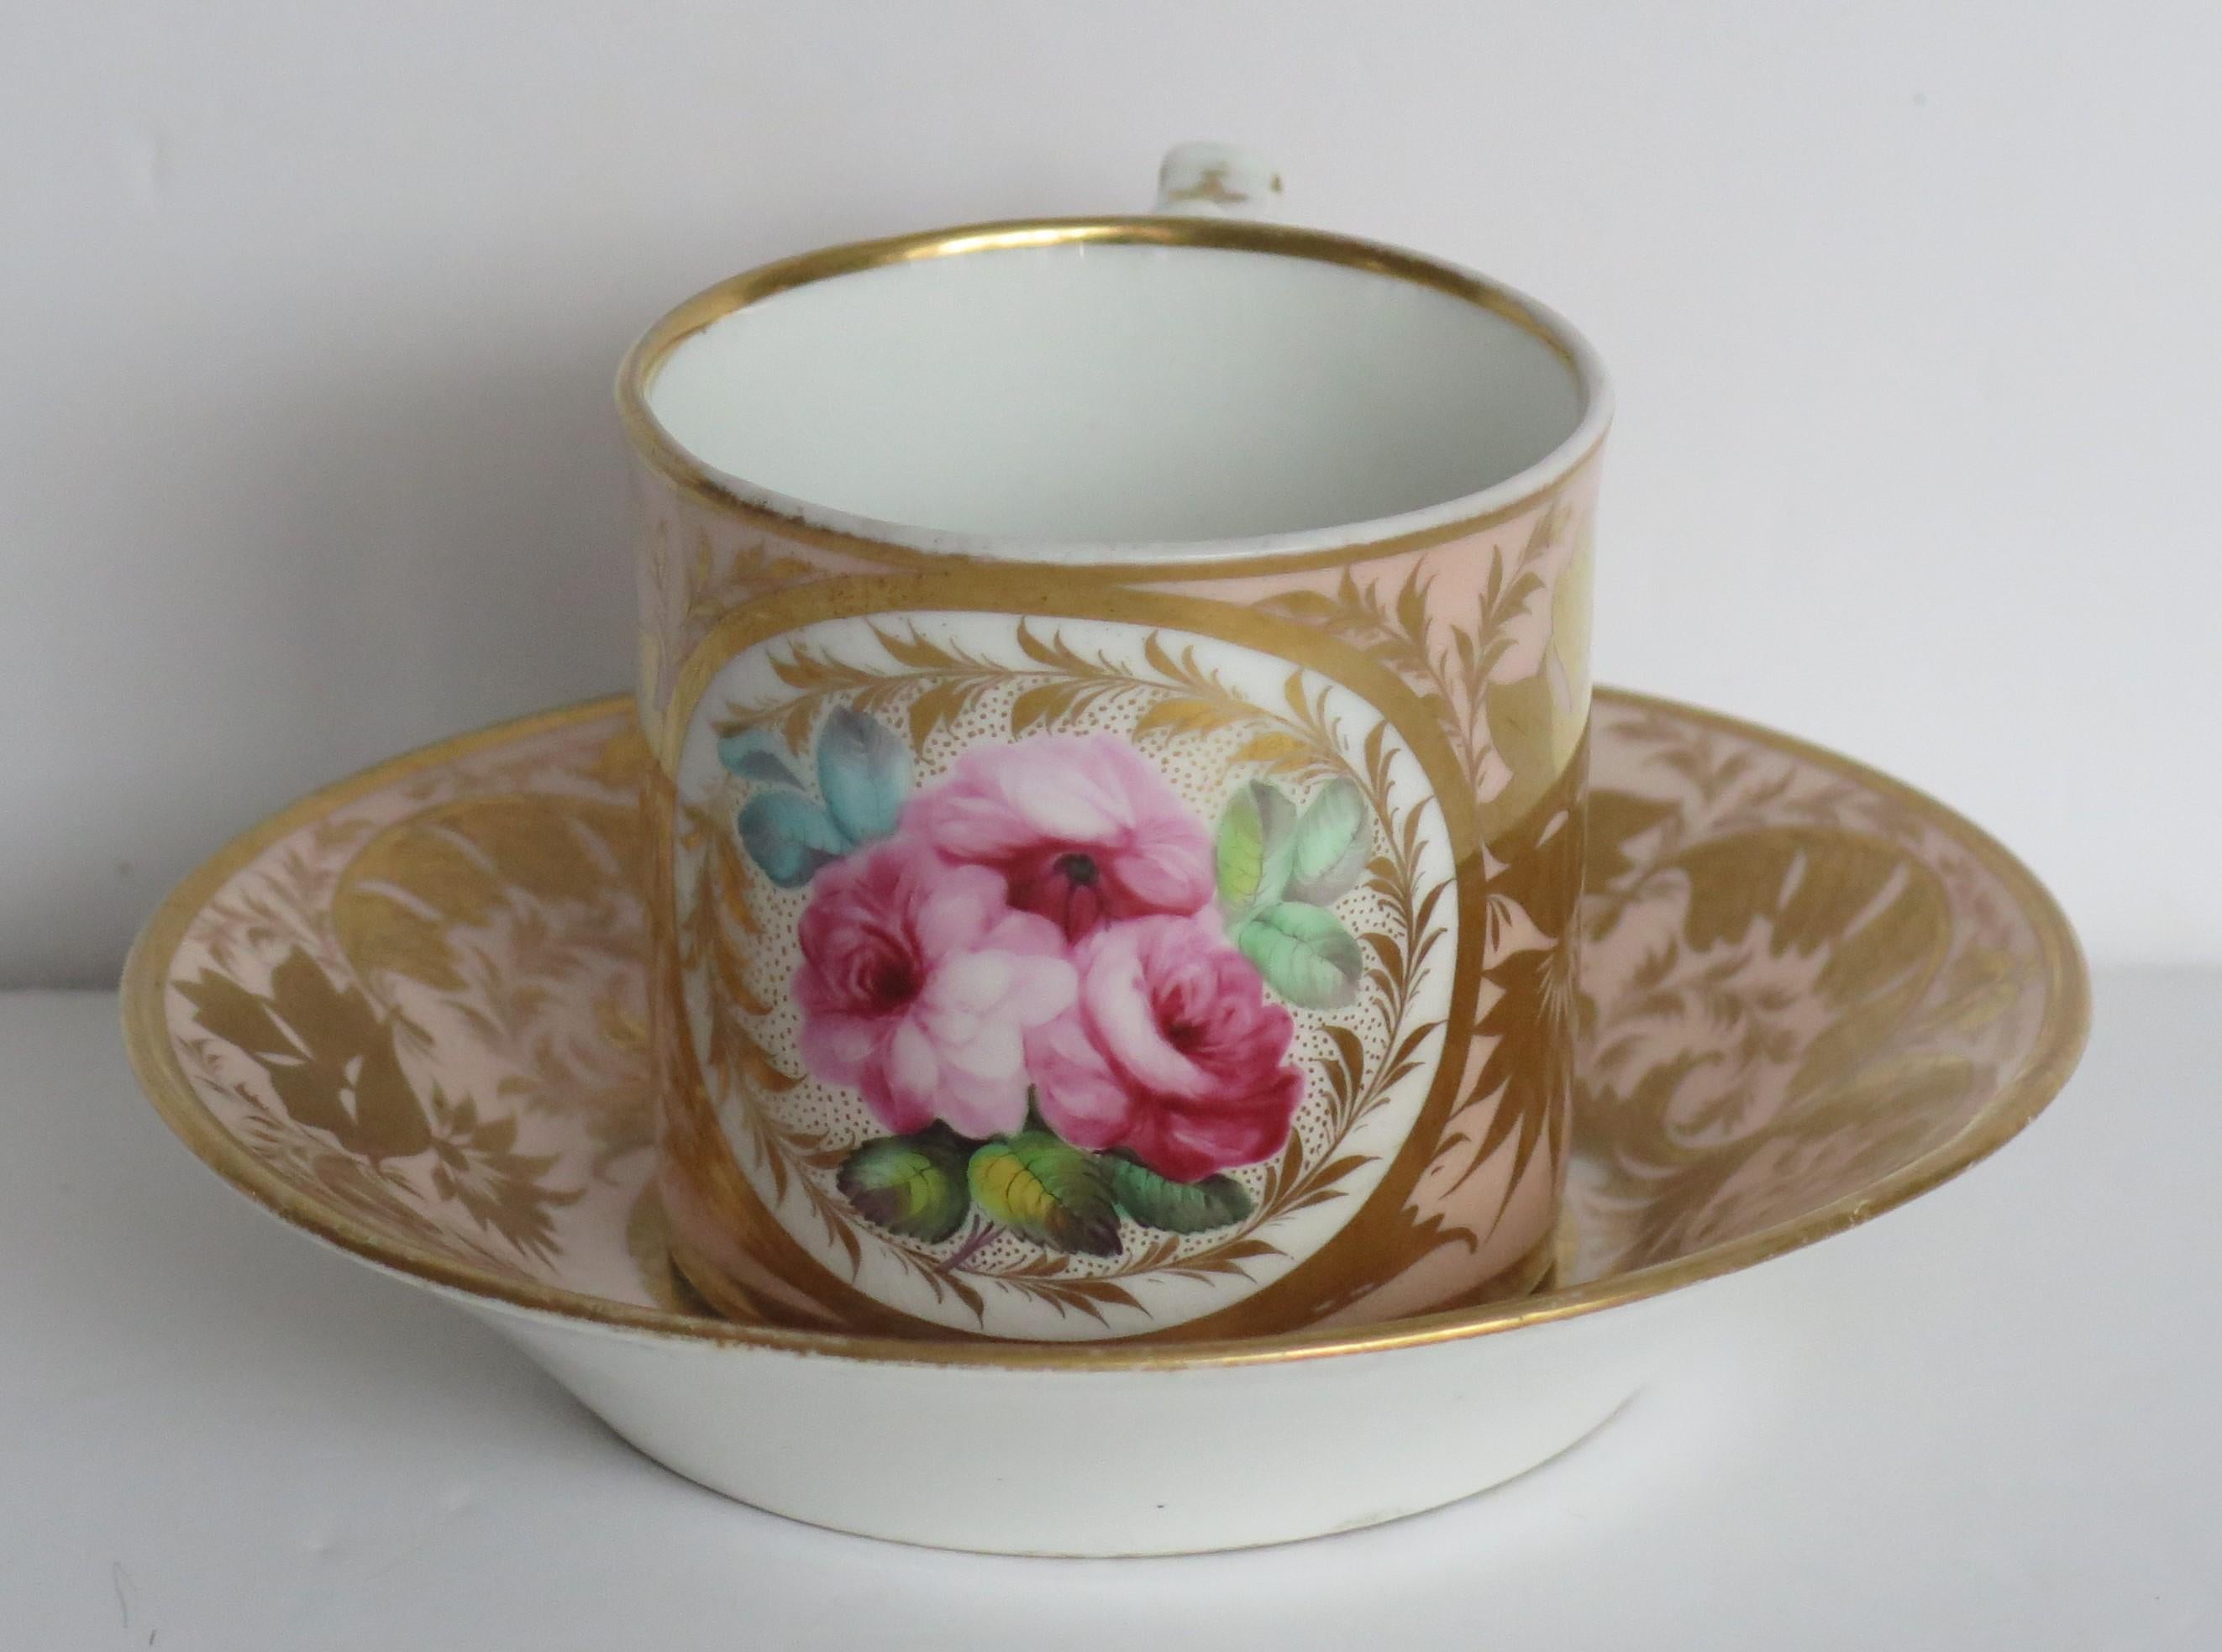 This is a beautiful porcelain coffee can and matching saucer by the Derby factory, made during the late Georgian period of the early years of the 19th Century

The cylindrical can tapers slightly to the base and has a 